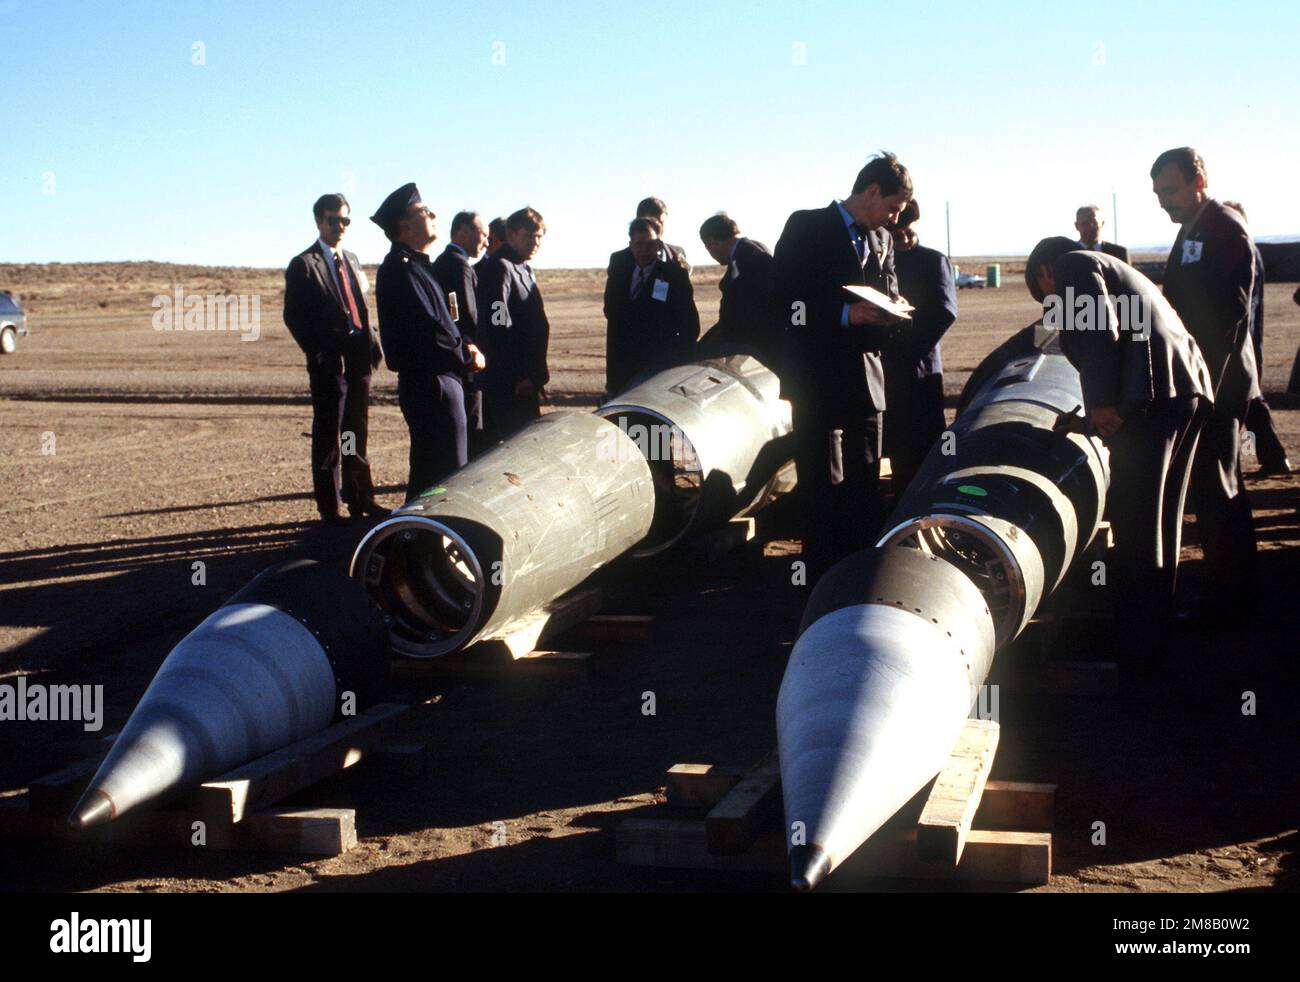 With their American escorts watching, Soviet inspectors record data from the side of a Pershing II missile prior to its destruction. Several missiles are to be destroyed in accordance with the Intermediate-Range Nuclear Forces (INF) Treaty. Base: Pueblo Army Depot Activity State: Colorado (CO) Country: United States Of America (USA) Stock Photo